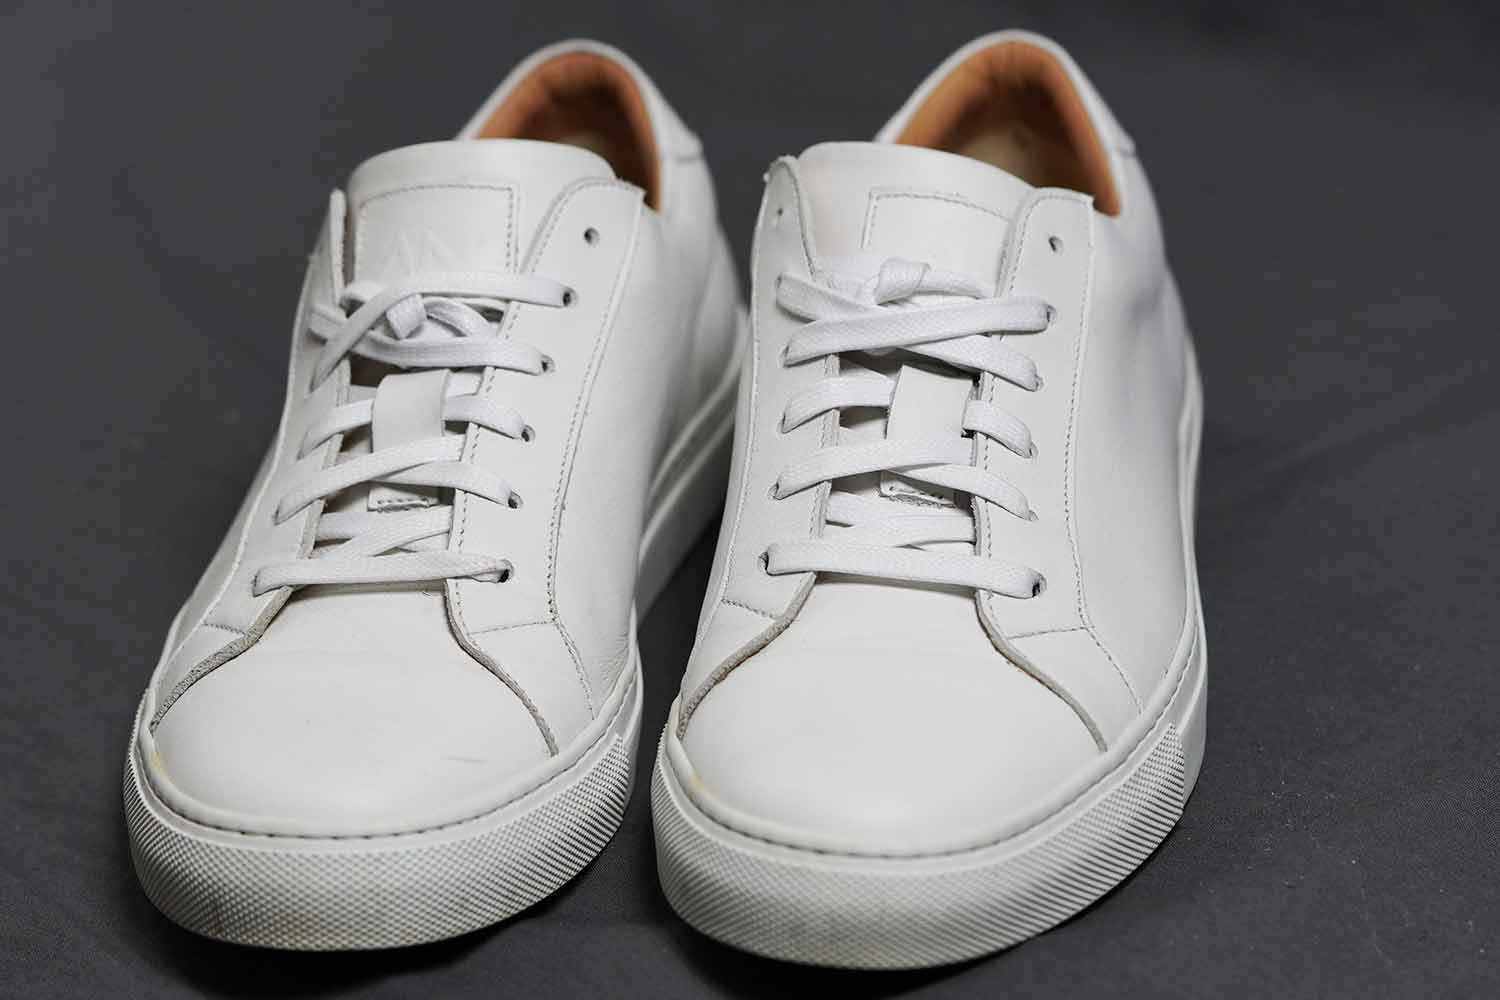 Duke White Leather Sneakers How They Have Held Up